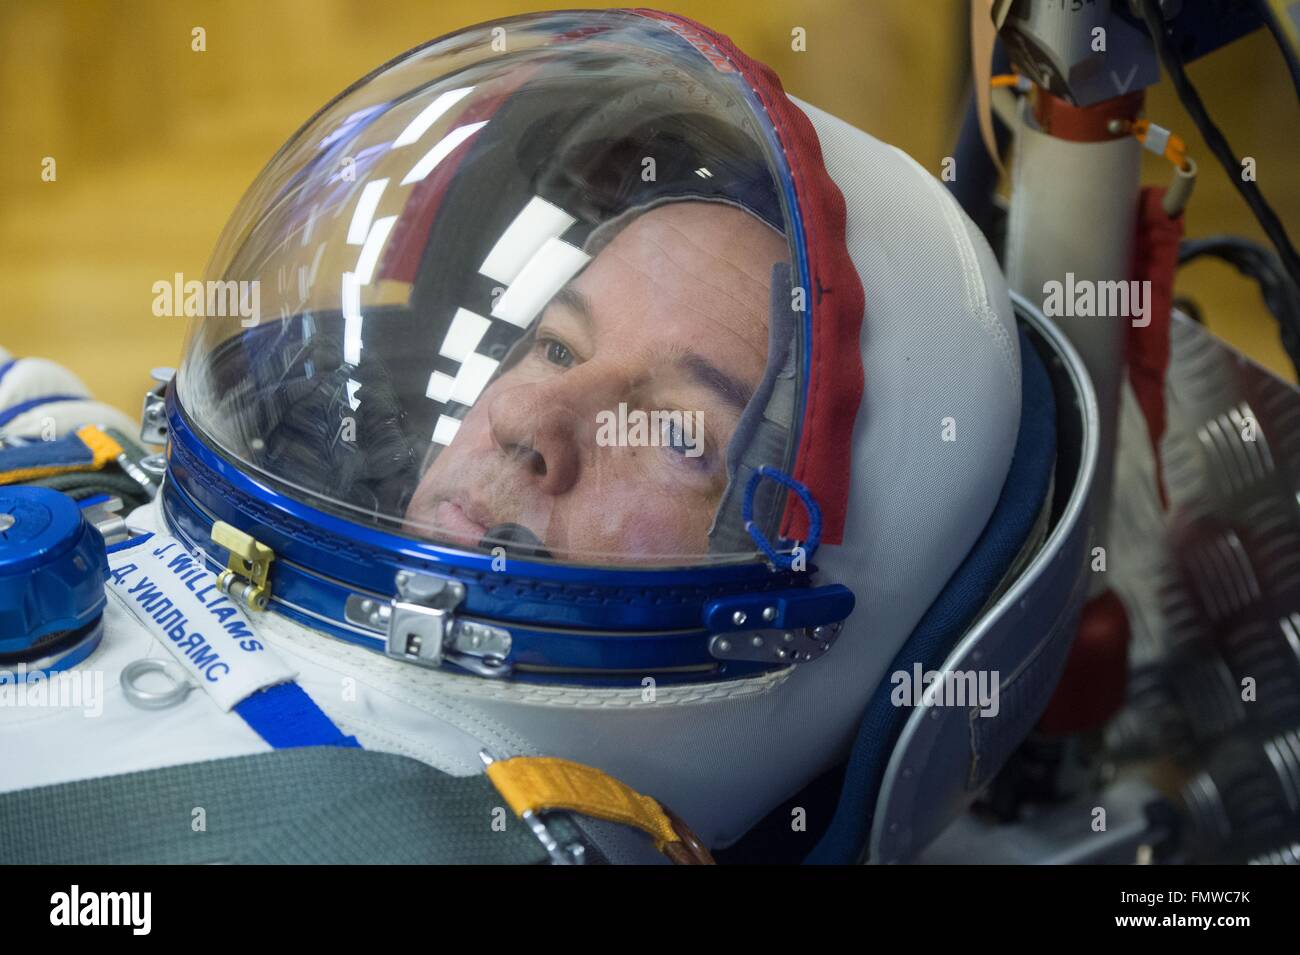 International Space Station Expedition 47 astronaut Jeff Williams of NASA during the leak check of his Sokol launch suit at the Baikonur Cosmodrome March 4, 2016 in Kazakhstan. The crew are scheduled to launch on a six-month mission to the station on March 19th. Stock Photo